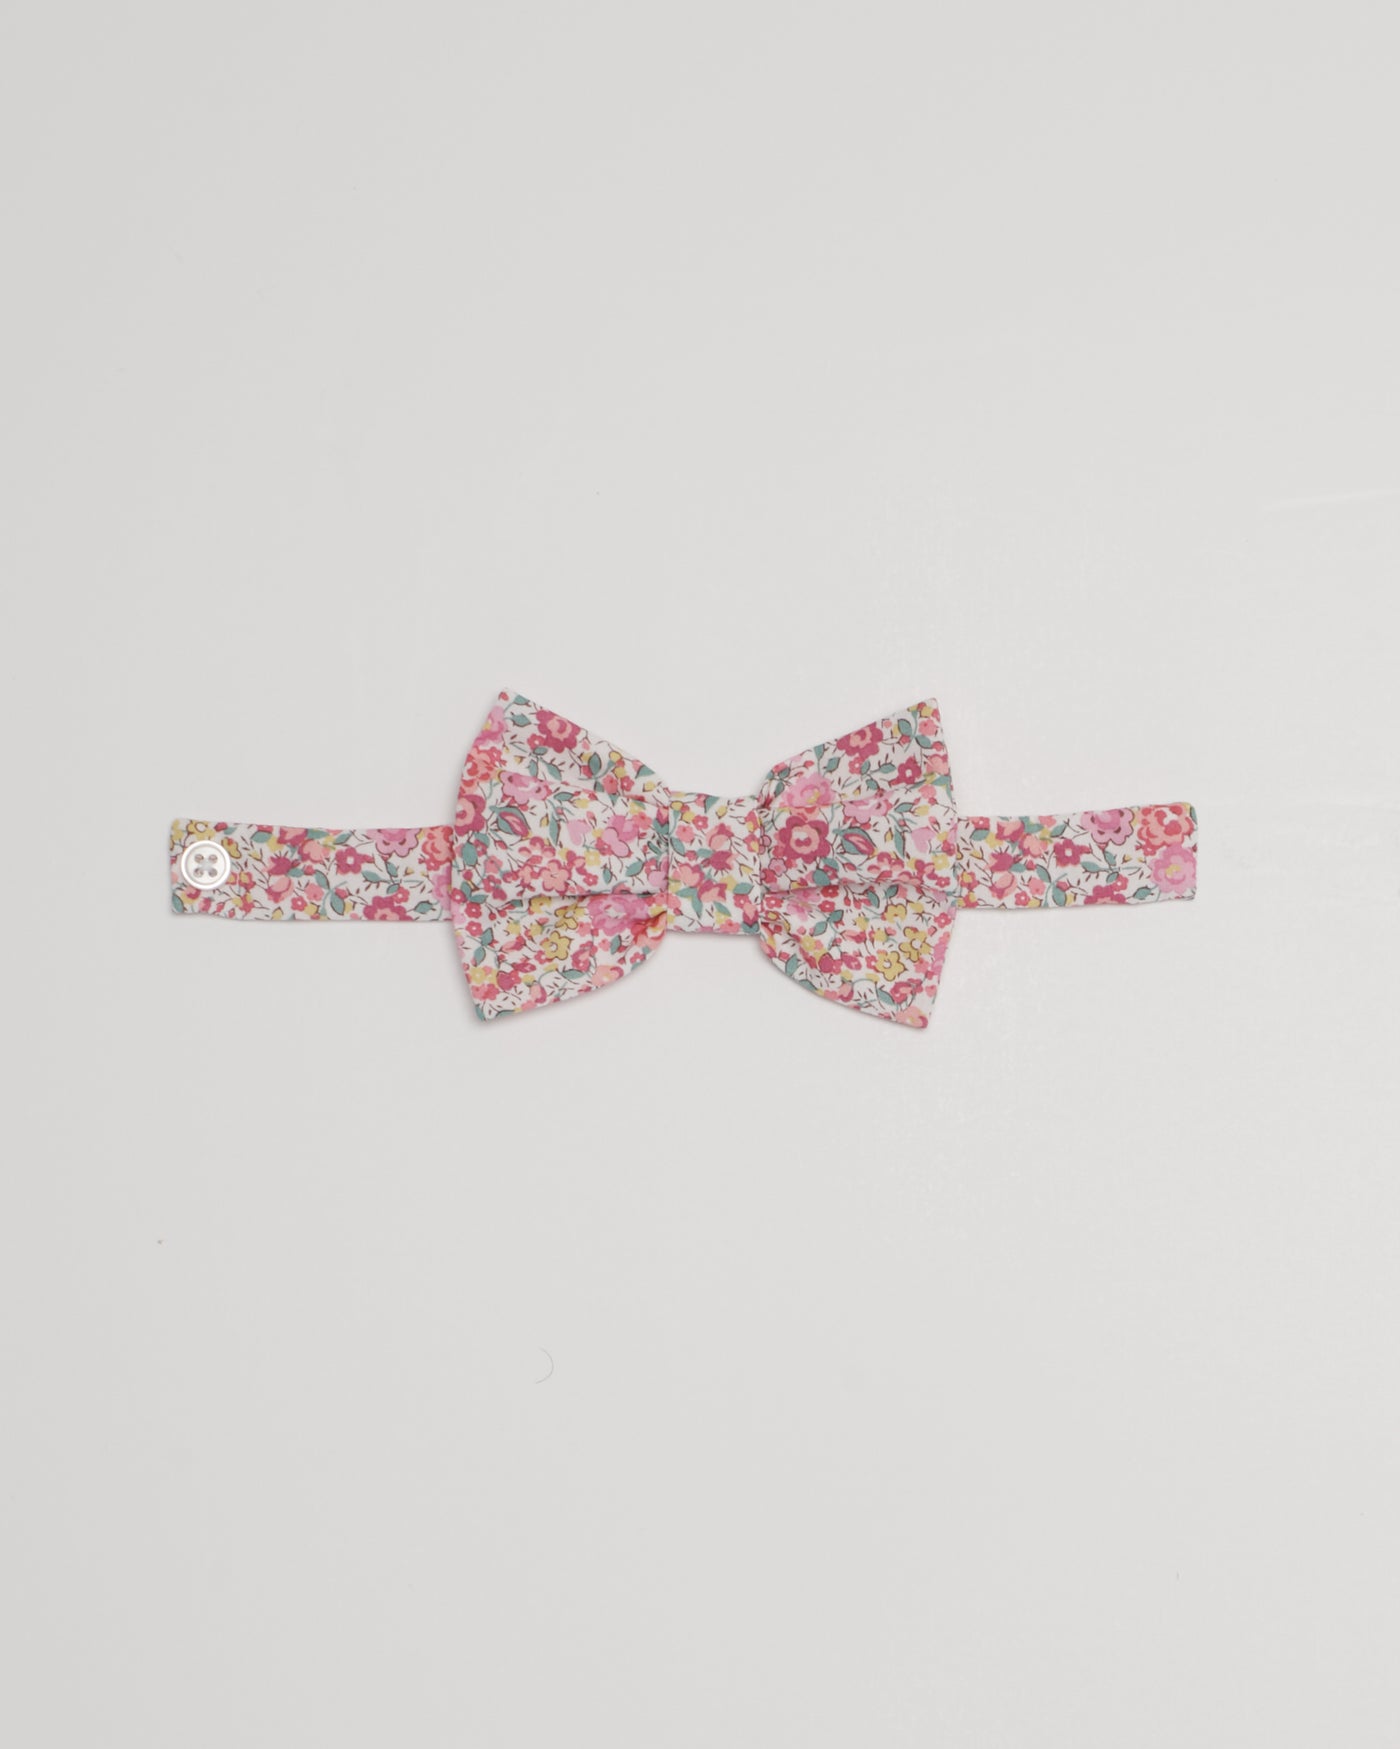 The Boys Bow Tie - Pink